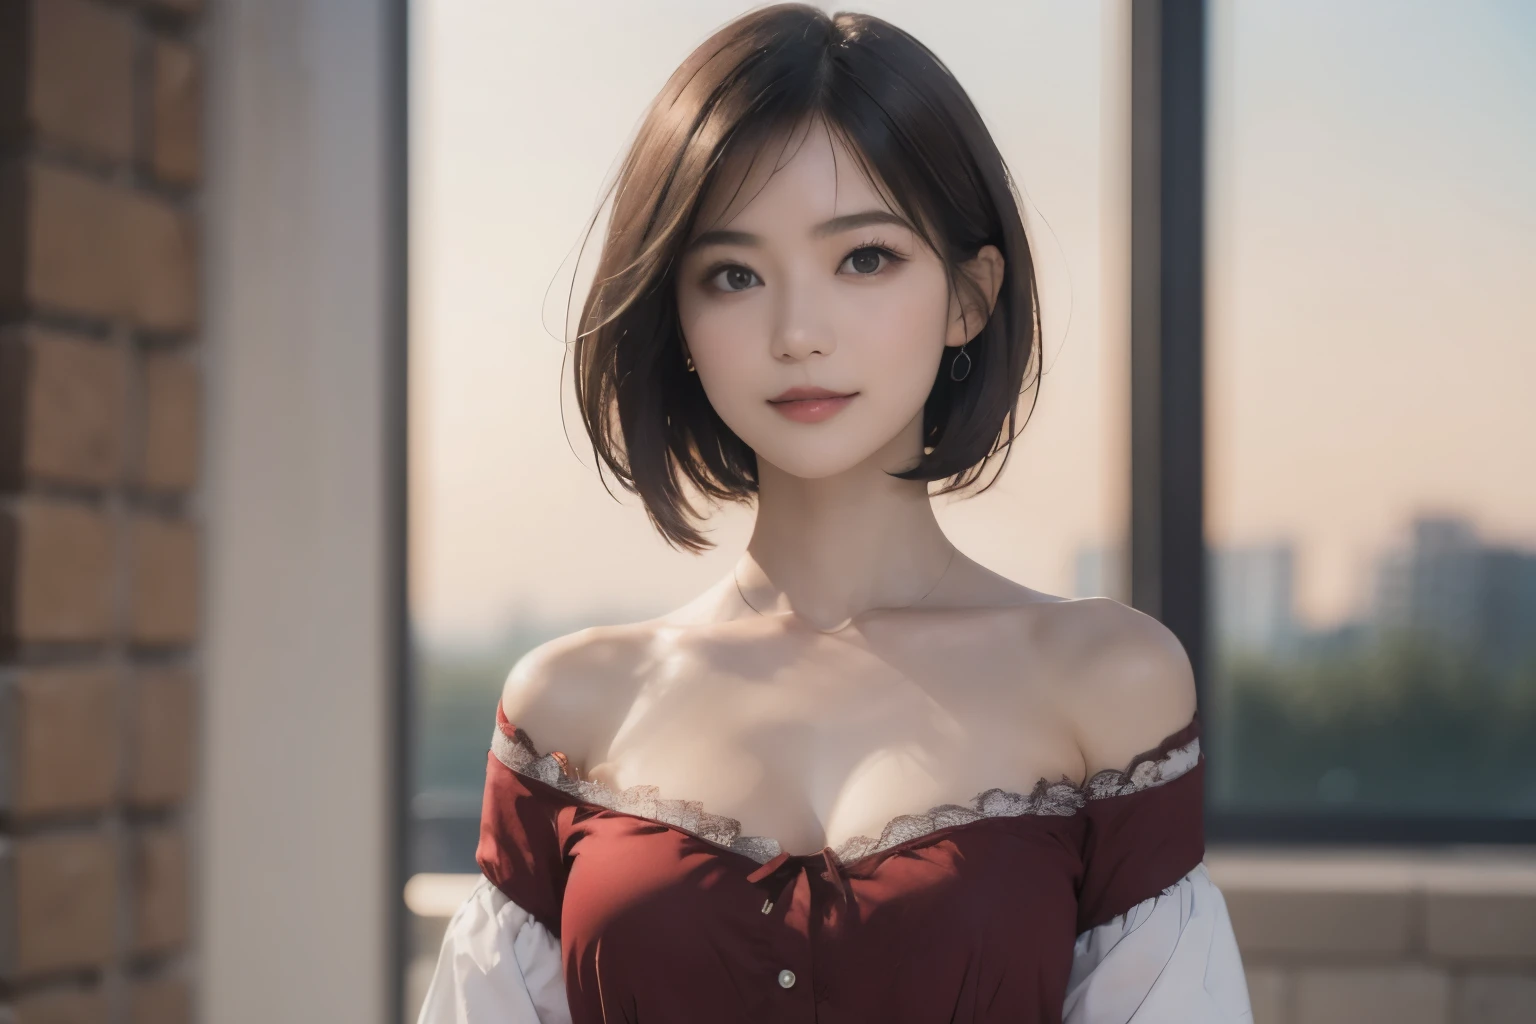 144
(20 year old woman,Are standing), (surreal), (High resolution), ((beautiful hairstyle 46)), ((short hair:1.46)), (gentle smile), (breasted:1.1), (lipstick)
